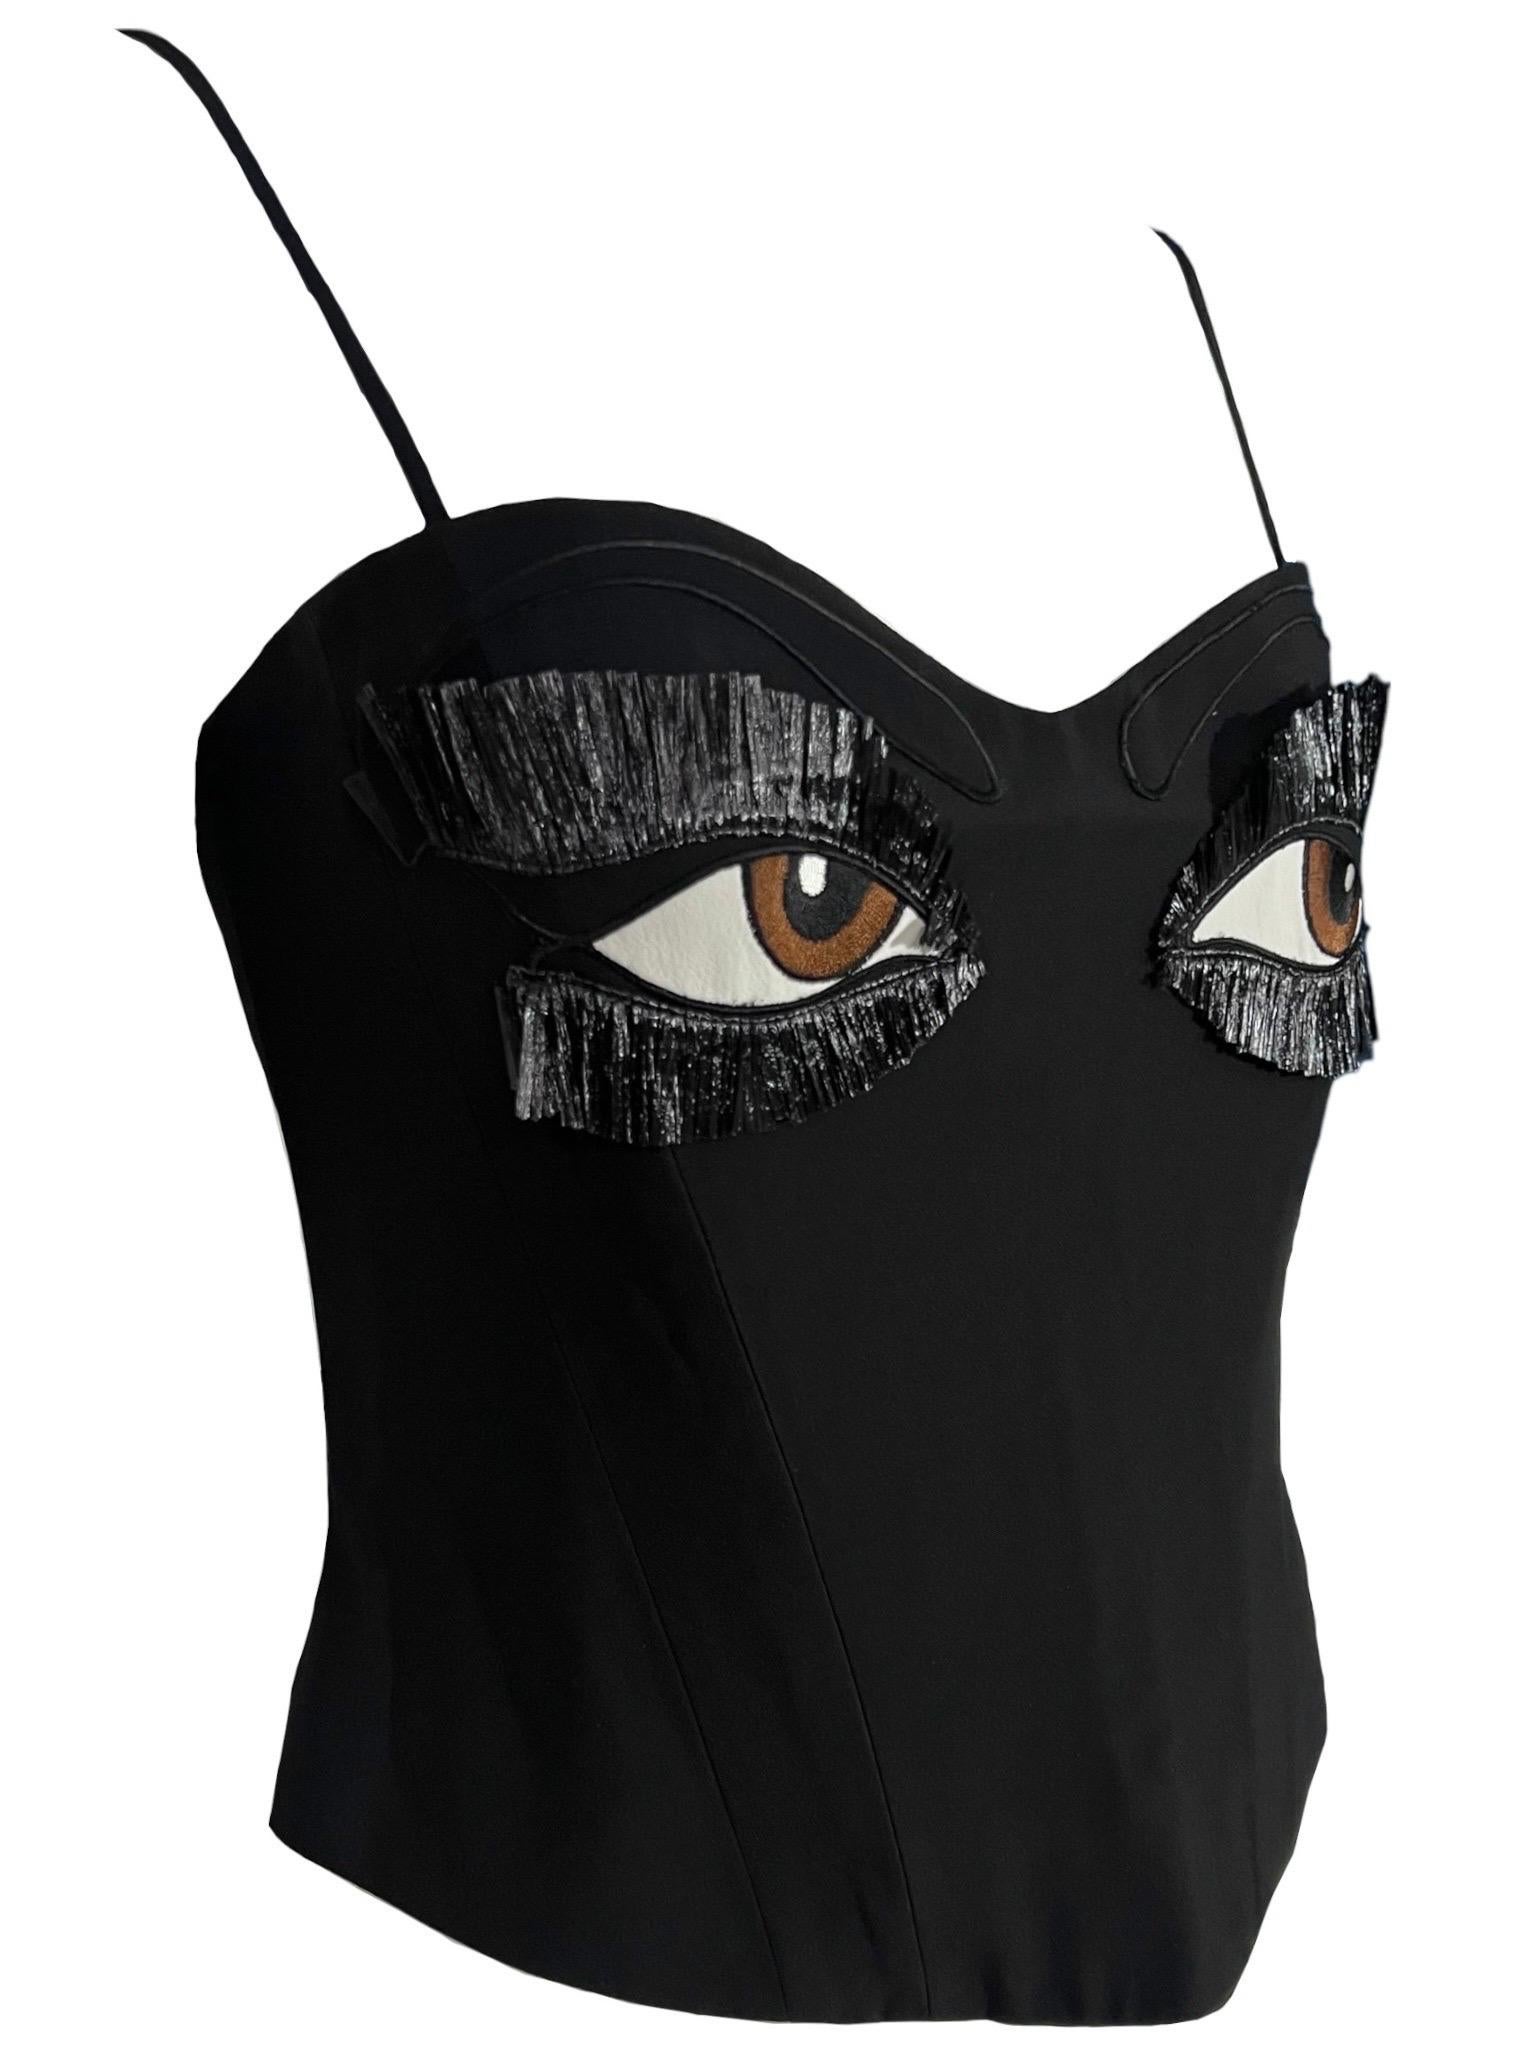 Women's S/S 1990 Moschino Couture Vintage Eyes Bustier Corset Top